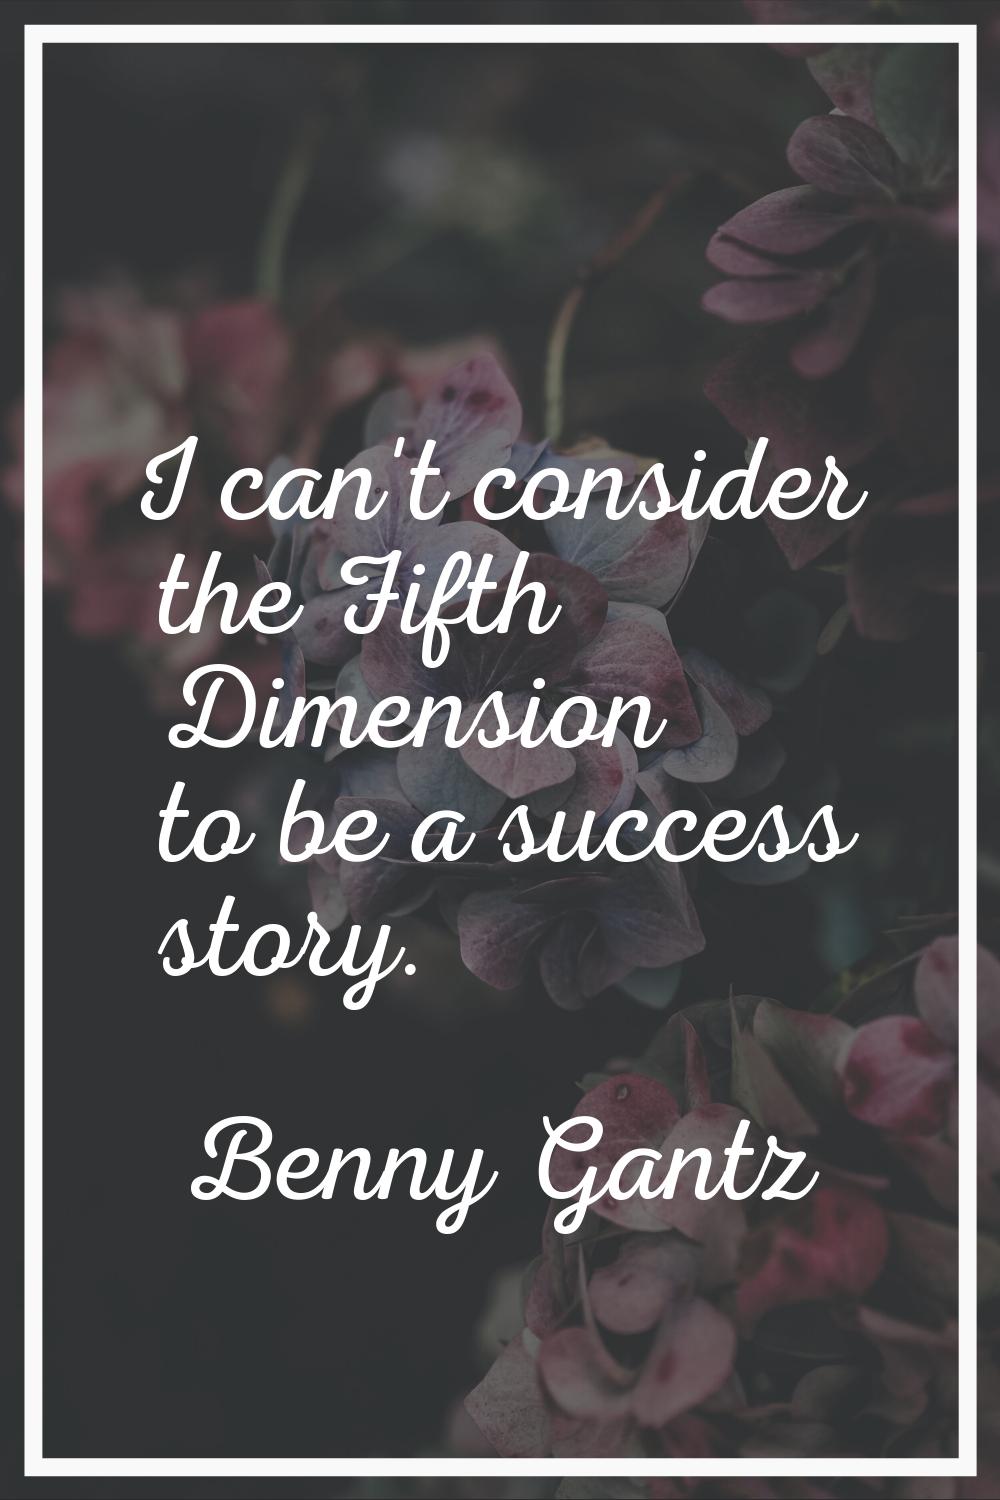 I can't consider the Fifth Dimension to be a success story.